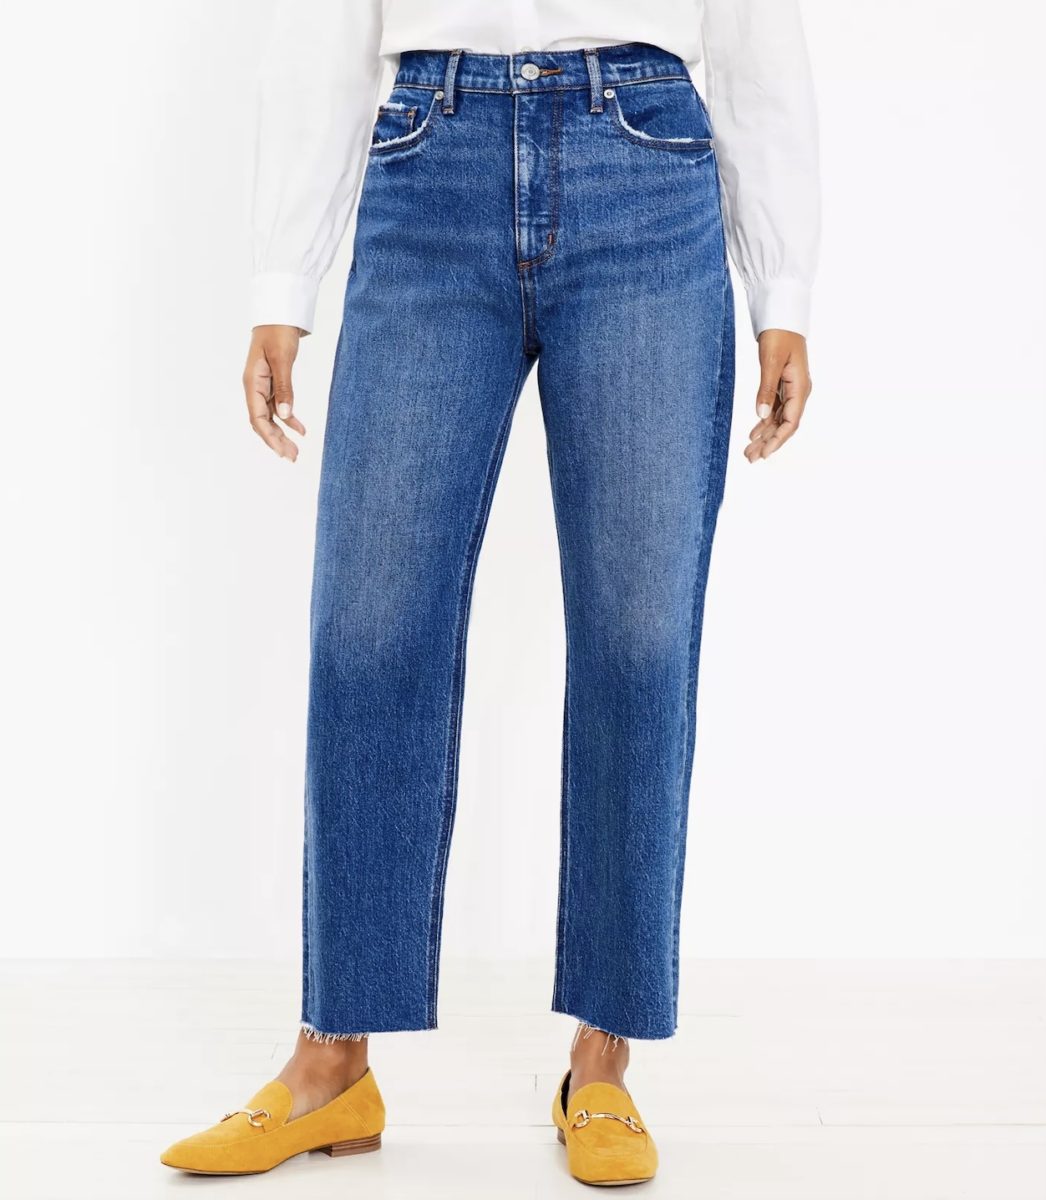 what are mom jeans? here are 10 stylish pairs to try